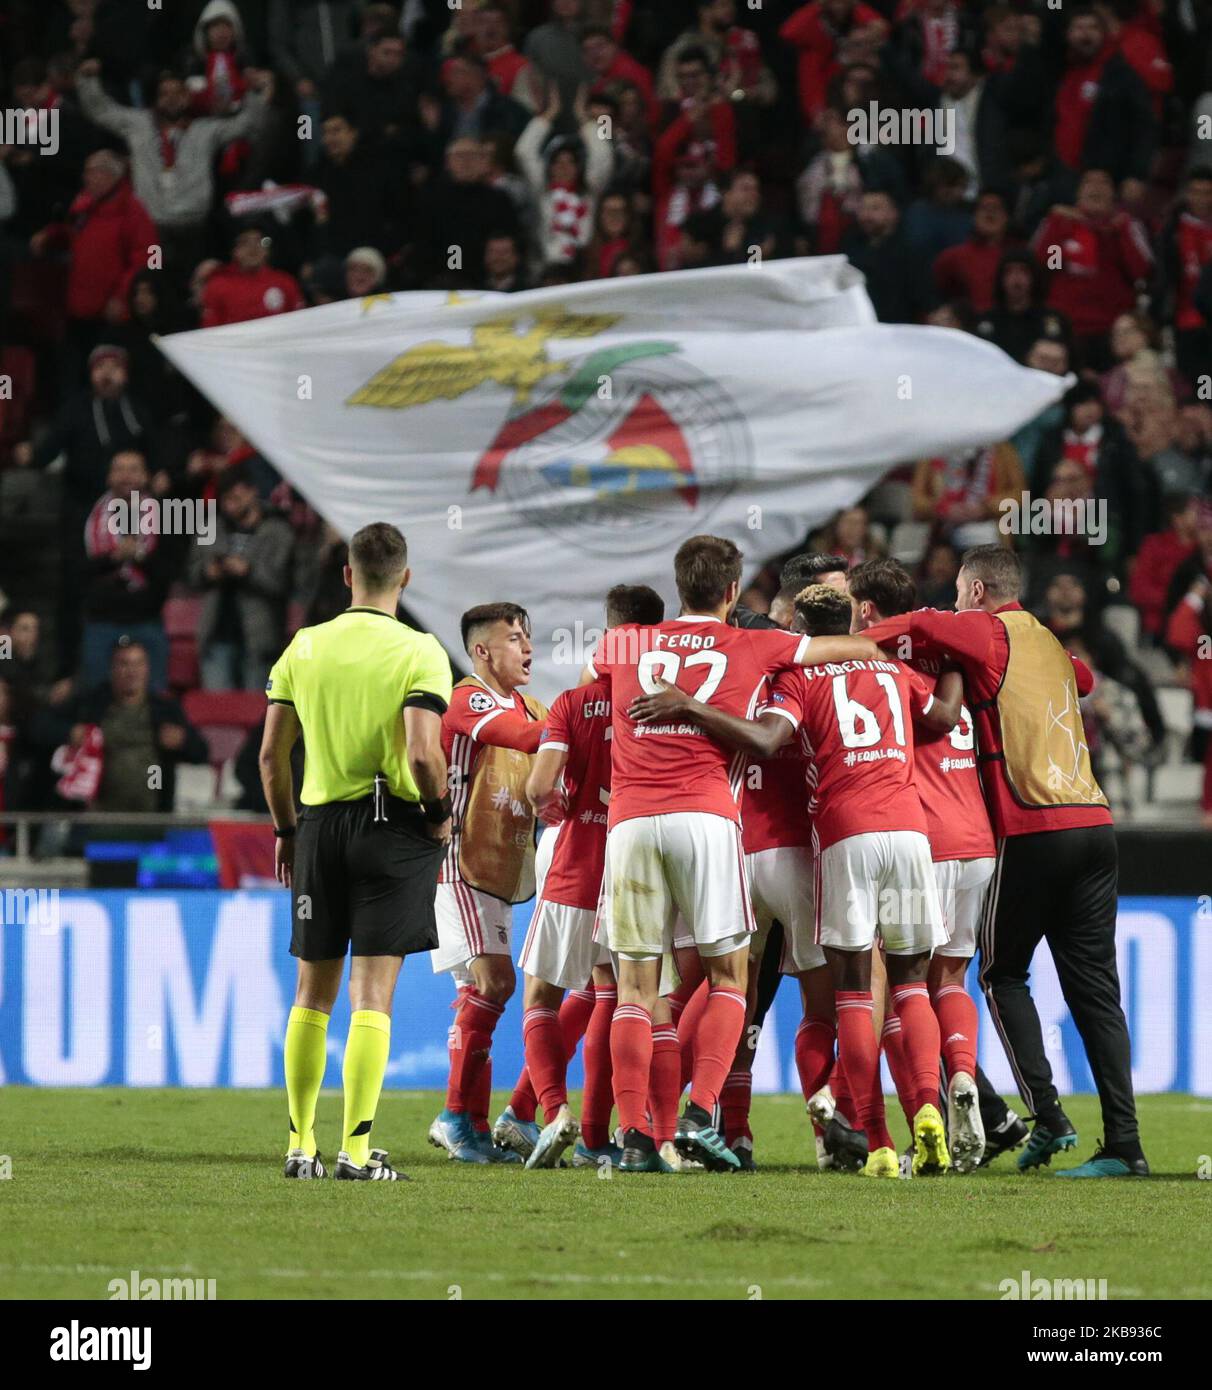 SL Benfica Team celebrates during the UEFA Champions League Group G match between SL Benfica and Olympique Lyon at Estadio da Luz on October 23, 2019 in Lisbon, Portugal. (Photo by Paulo Nascimento/DPI/NurPhoto) Stock Photo